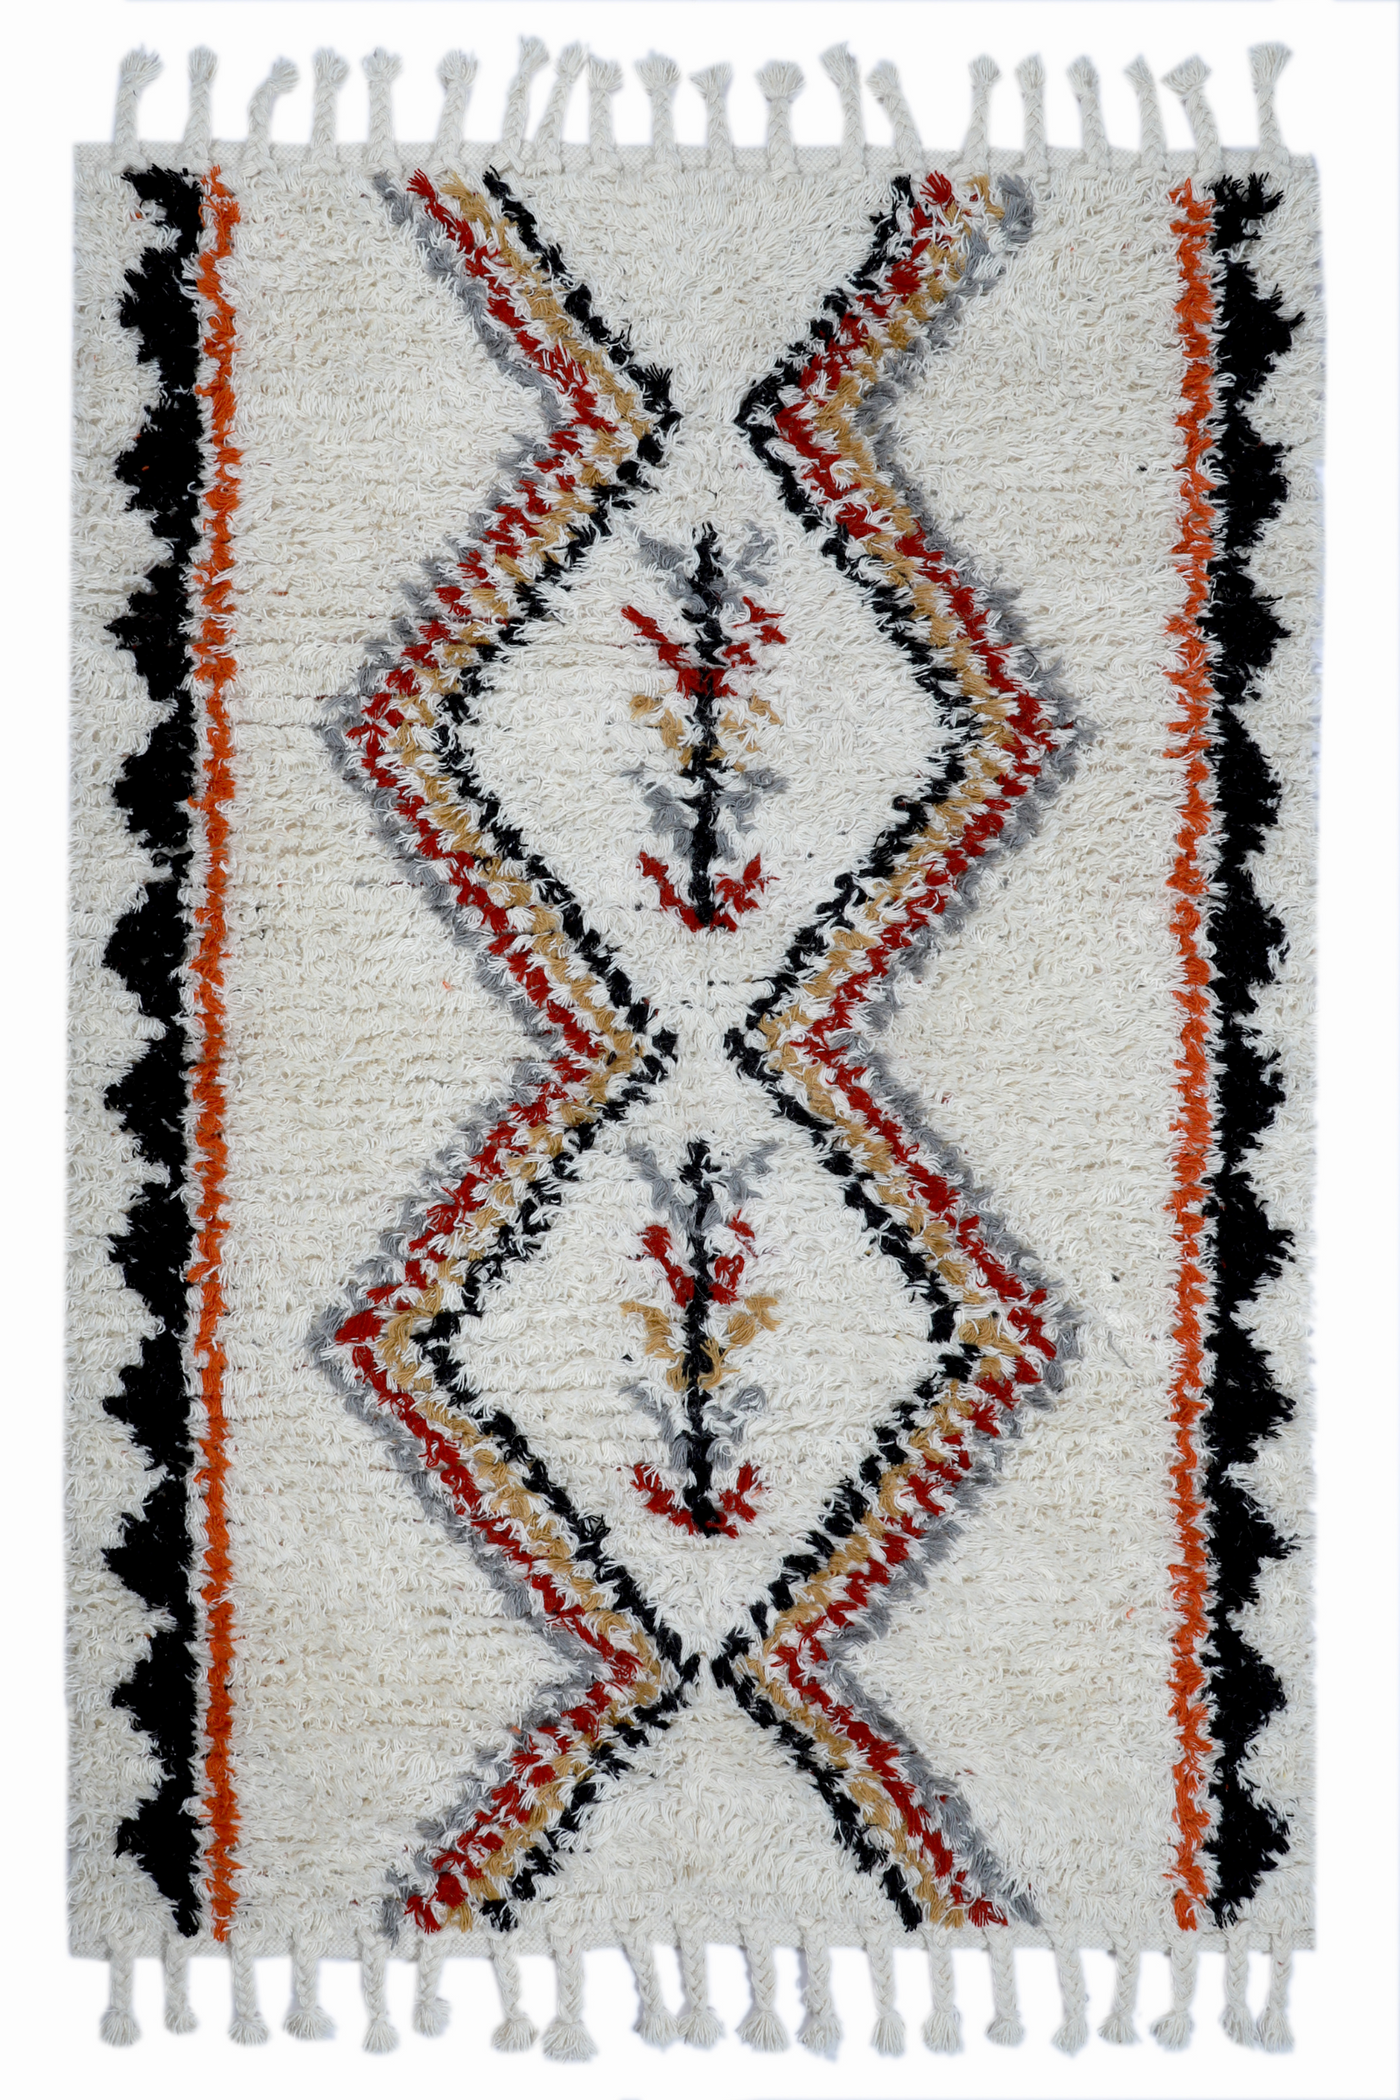 MOROCCAN TEXTURED WOVEN RUGS